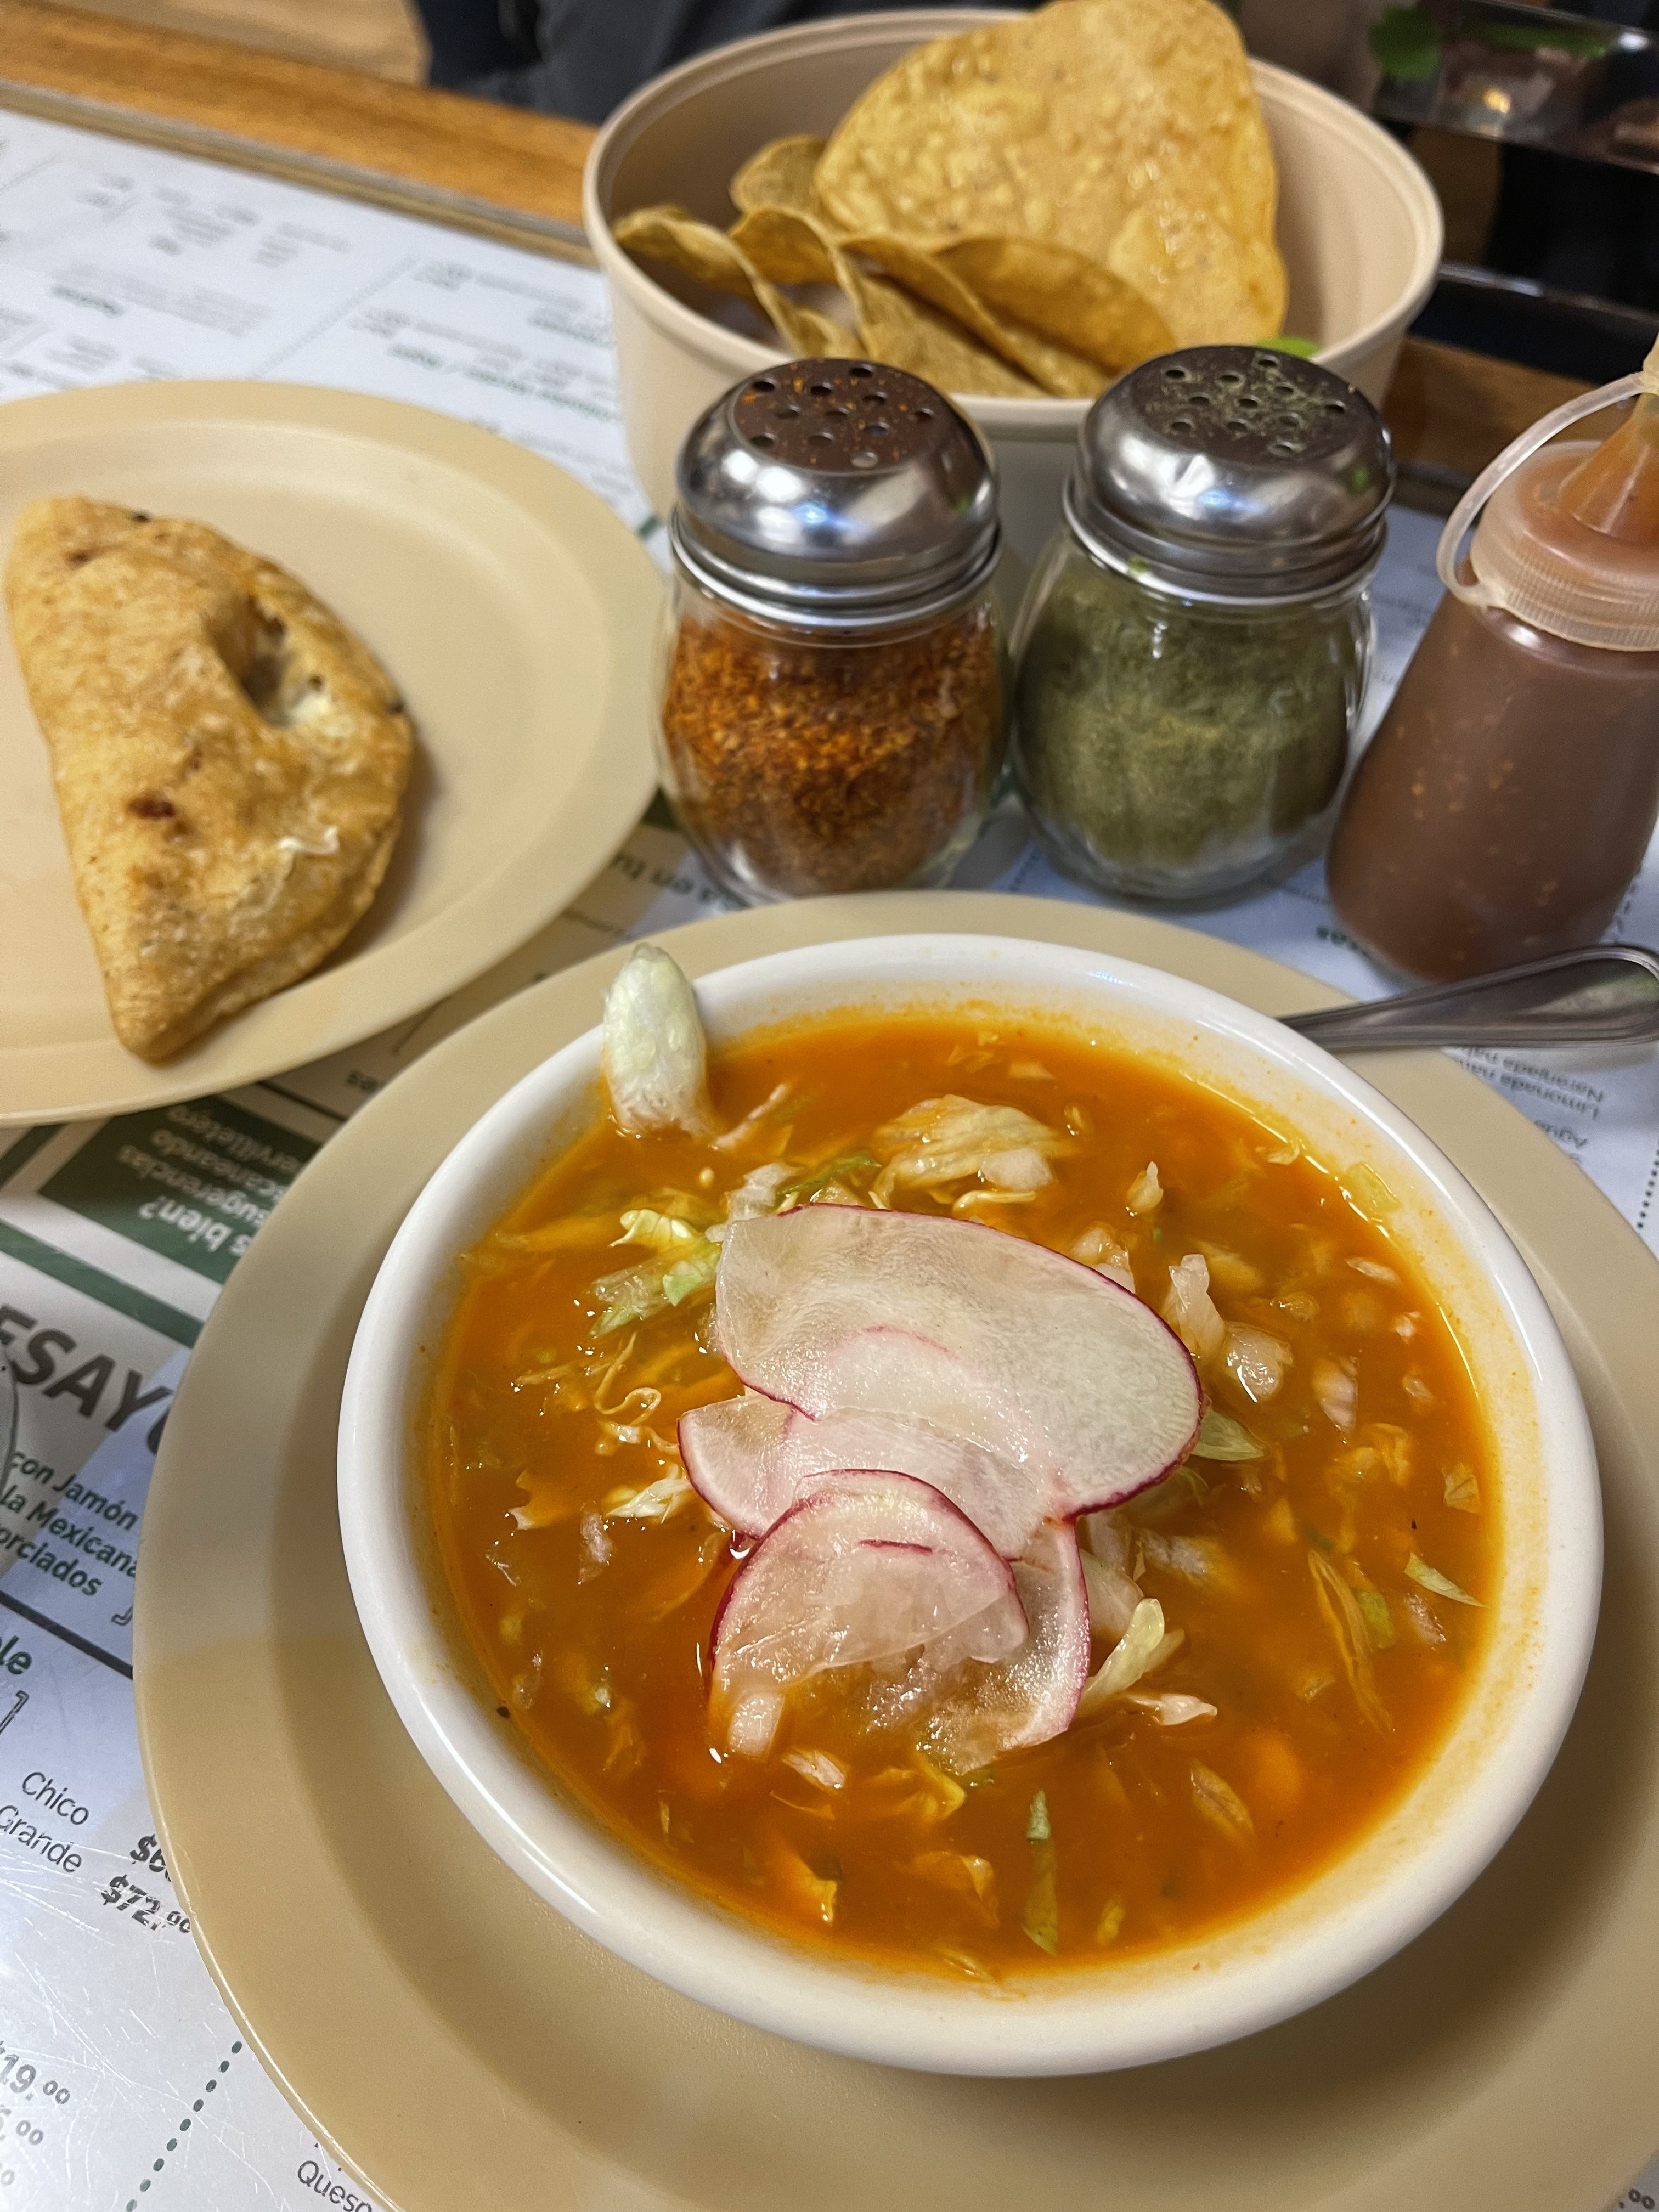 If you're looking for the vegetarian pozole, make sure to order the "pozole sin carne"